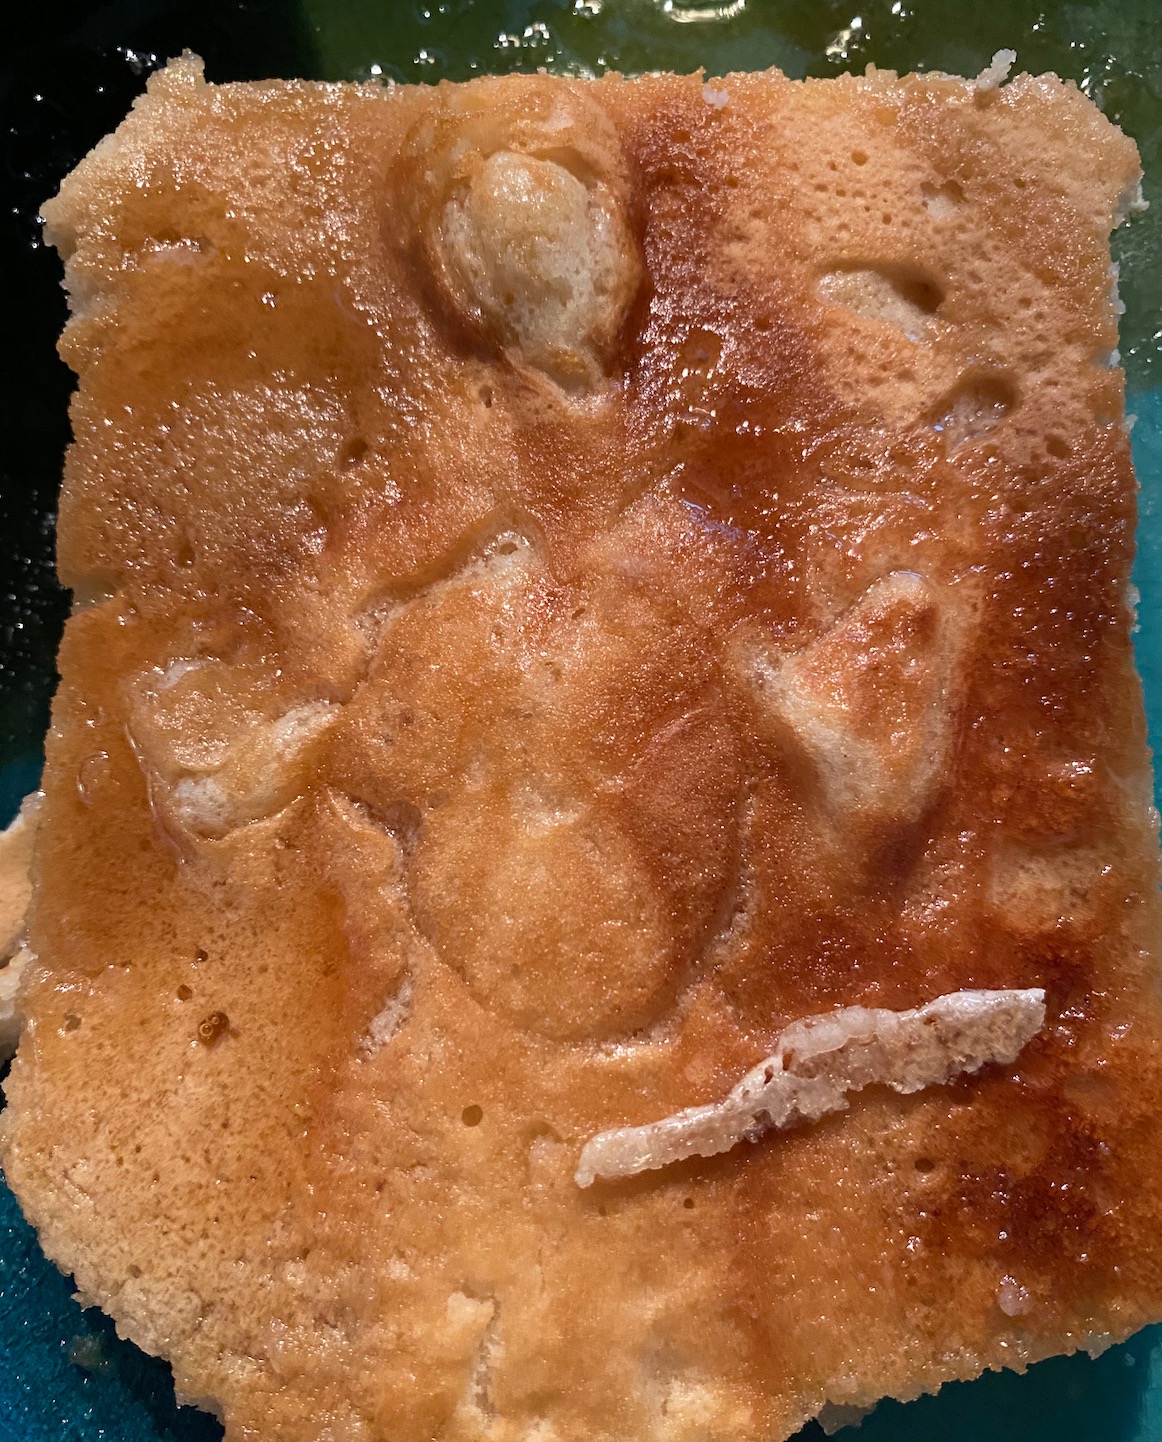 The syrup-soaked torso of Han Solo, just before I finally ate it. (Photo: Gizmodo)